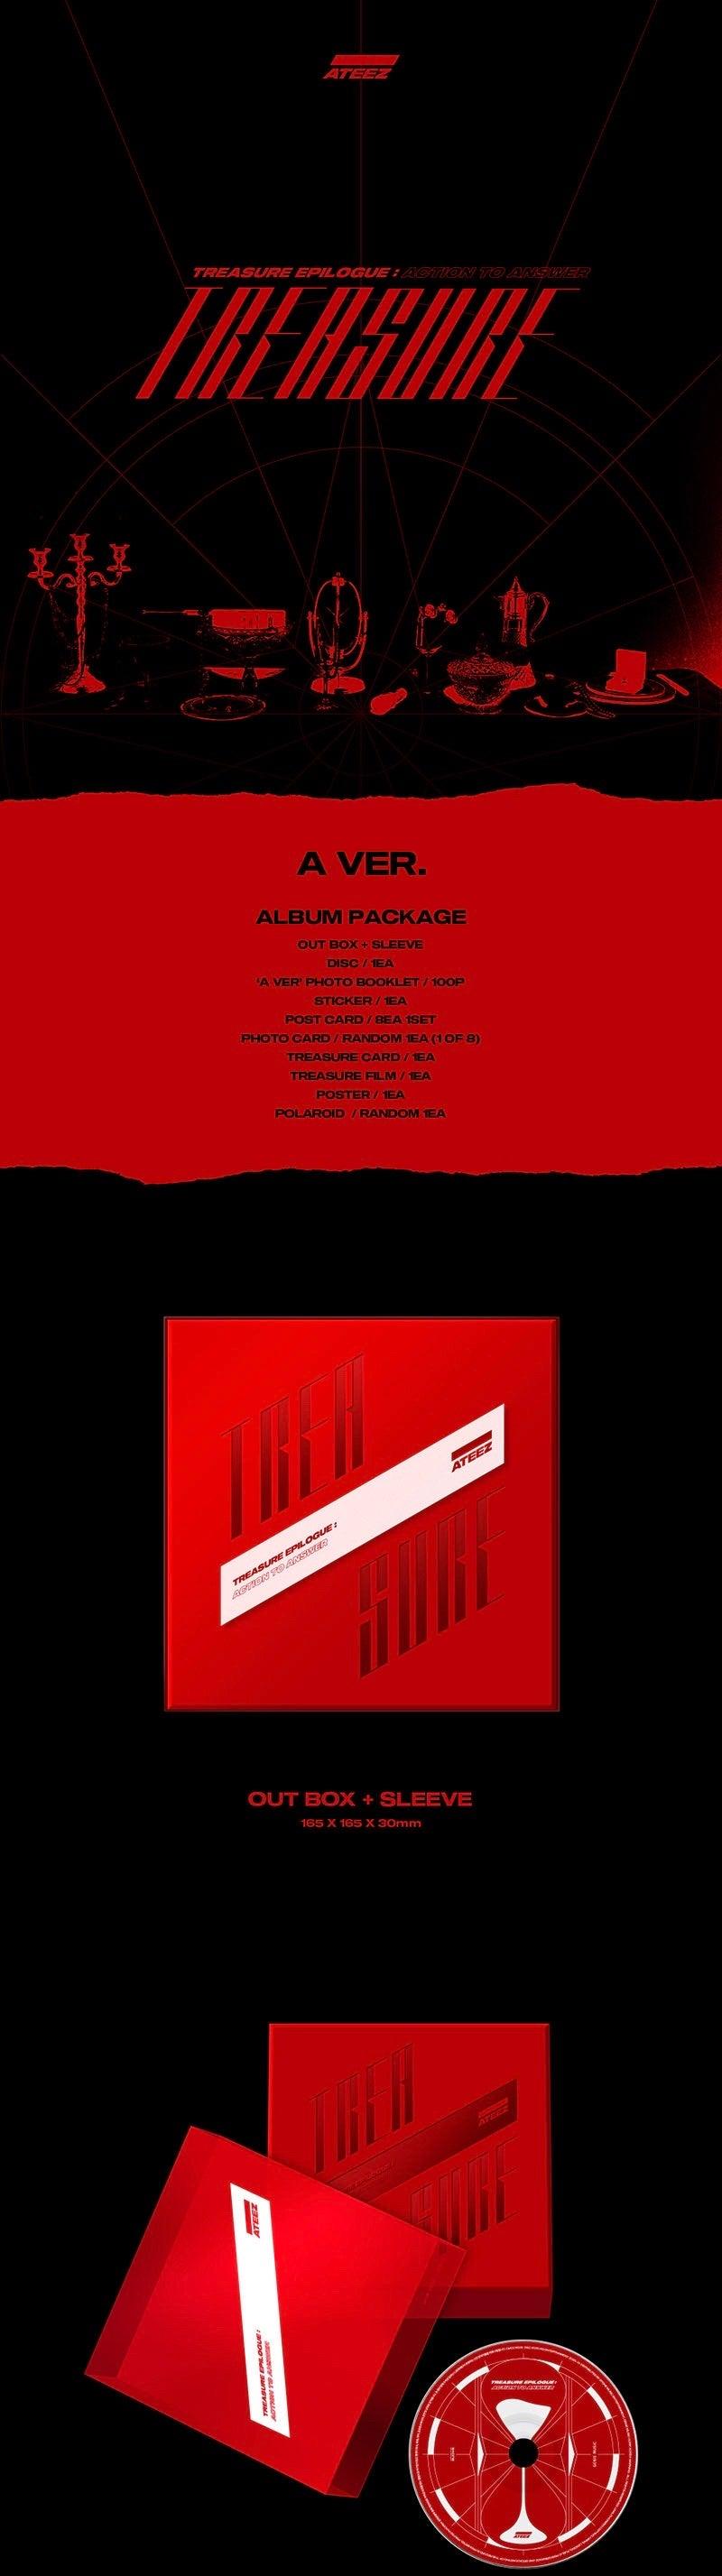 ATEEZ - Treasure Epilouge: Action to Answer - J-Store Online